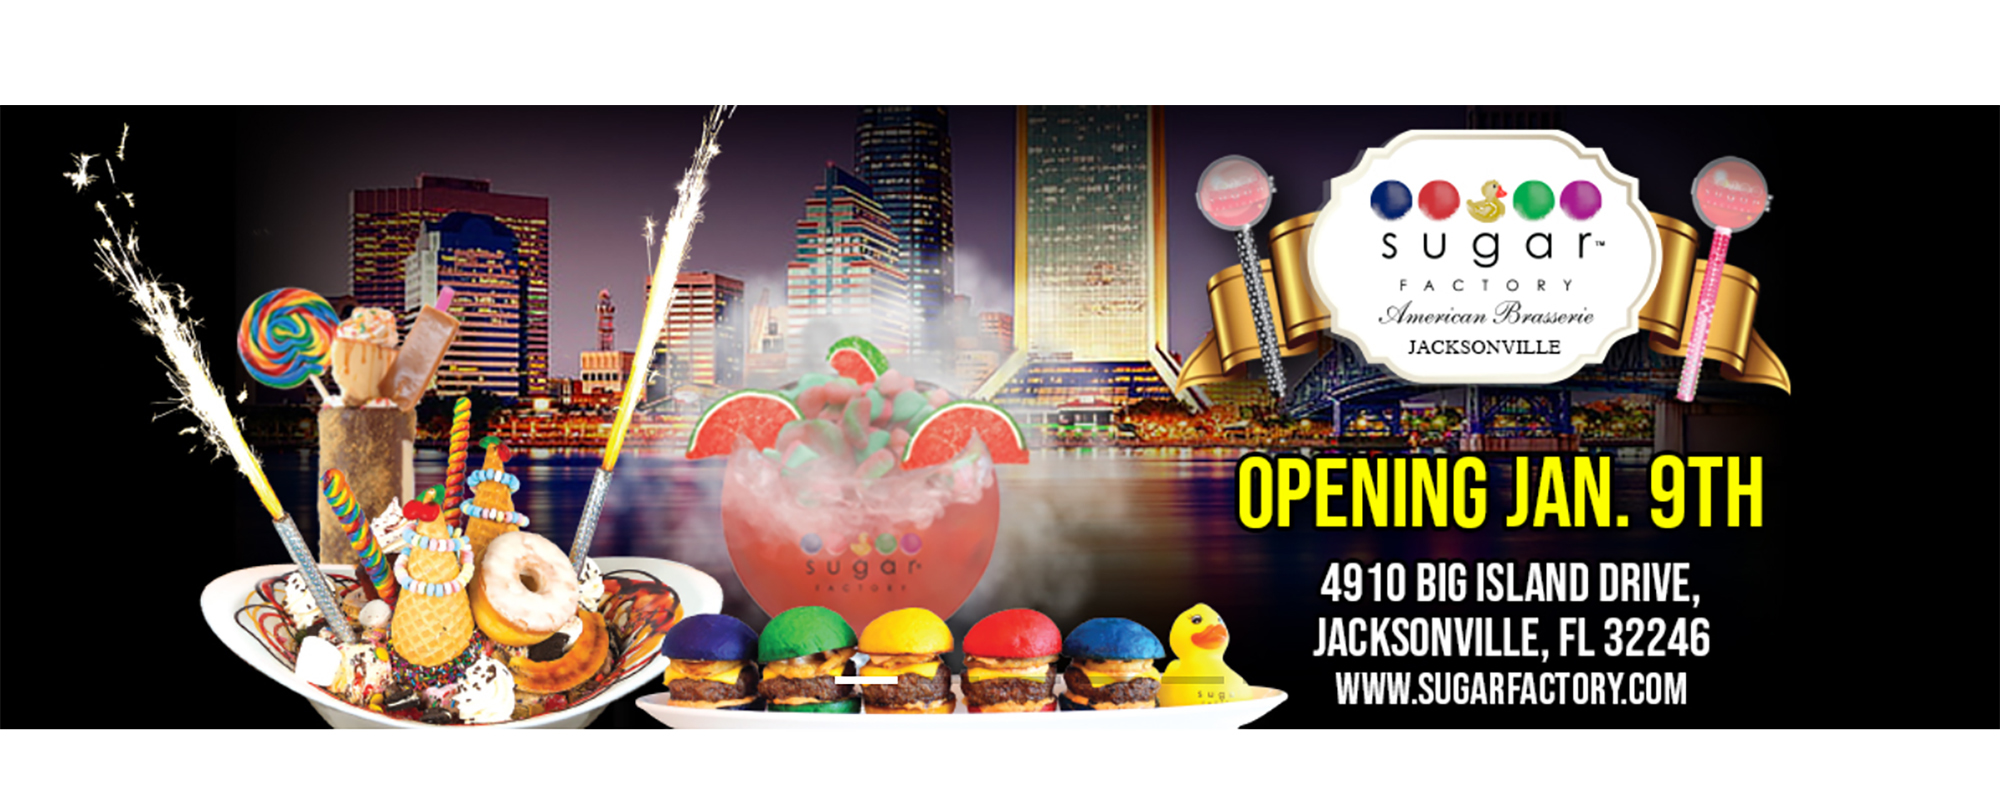 Sugar Factory is announcing the Jacksonville opening date on its website.